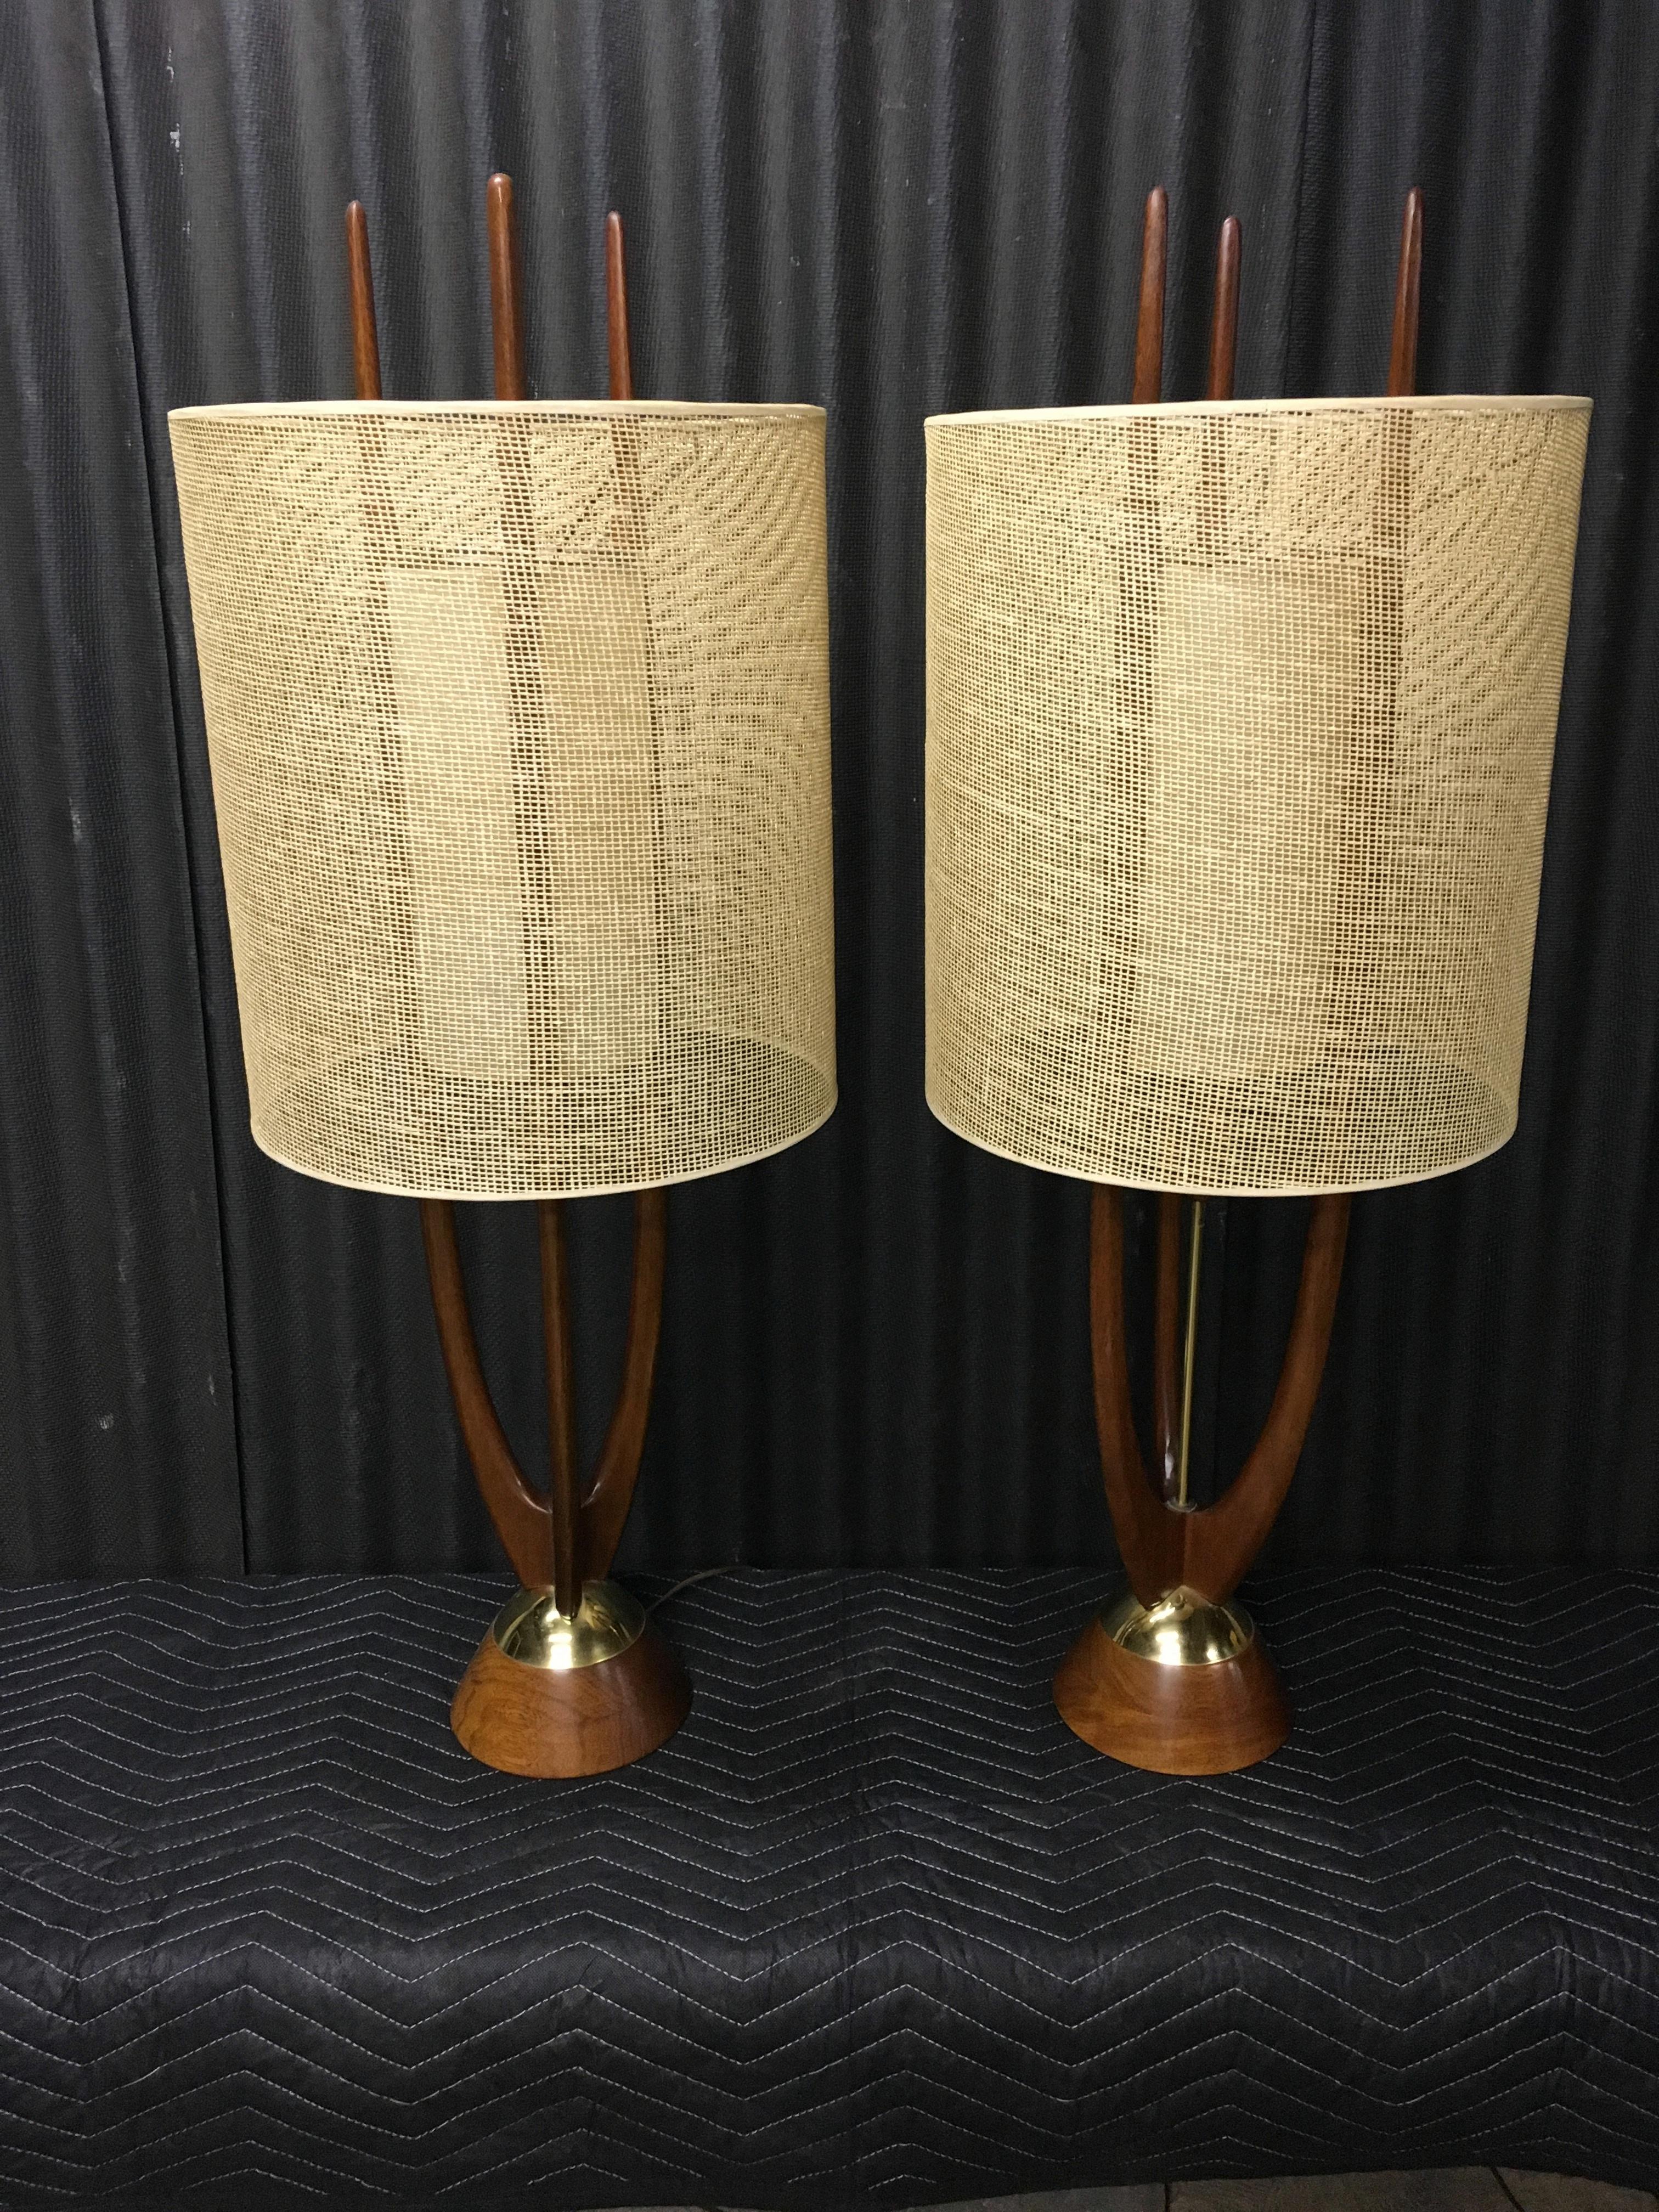 These are the most sought after Modeline lamps that exist. And, if you love this style, you won't find a pair, in better shape, out there.
I've been over these lamps looking for imperfections and I can find very little wear at all.
There's some